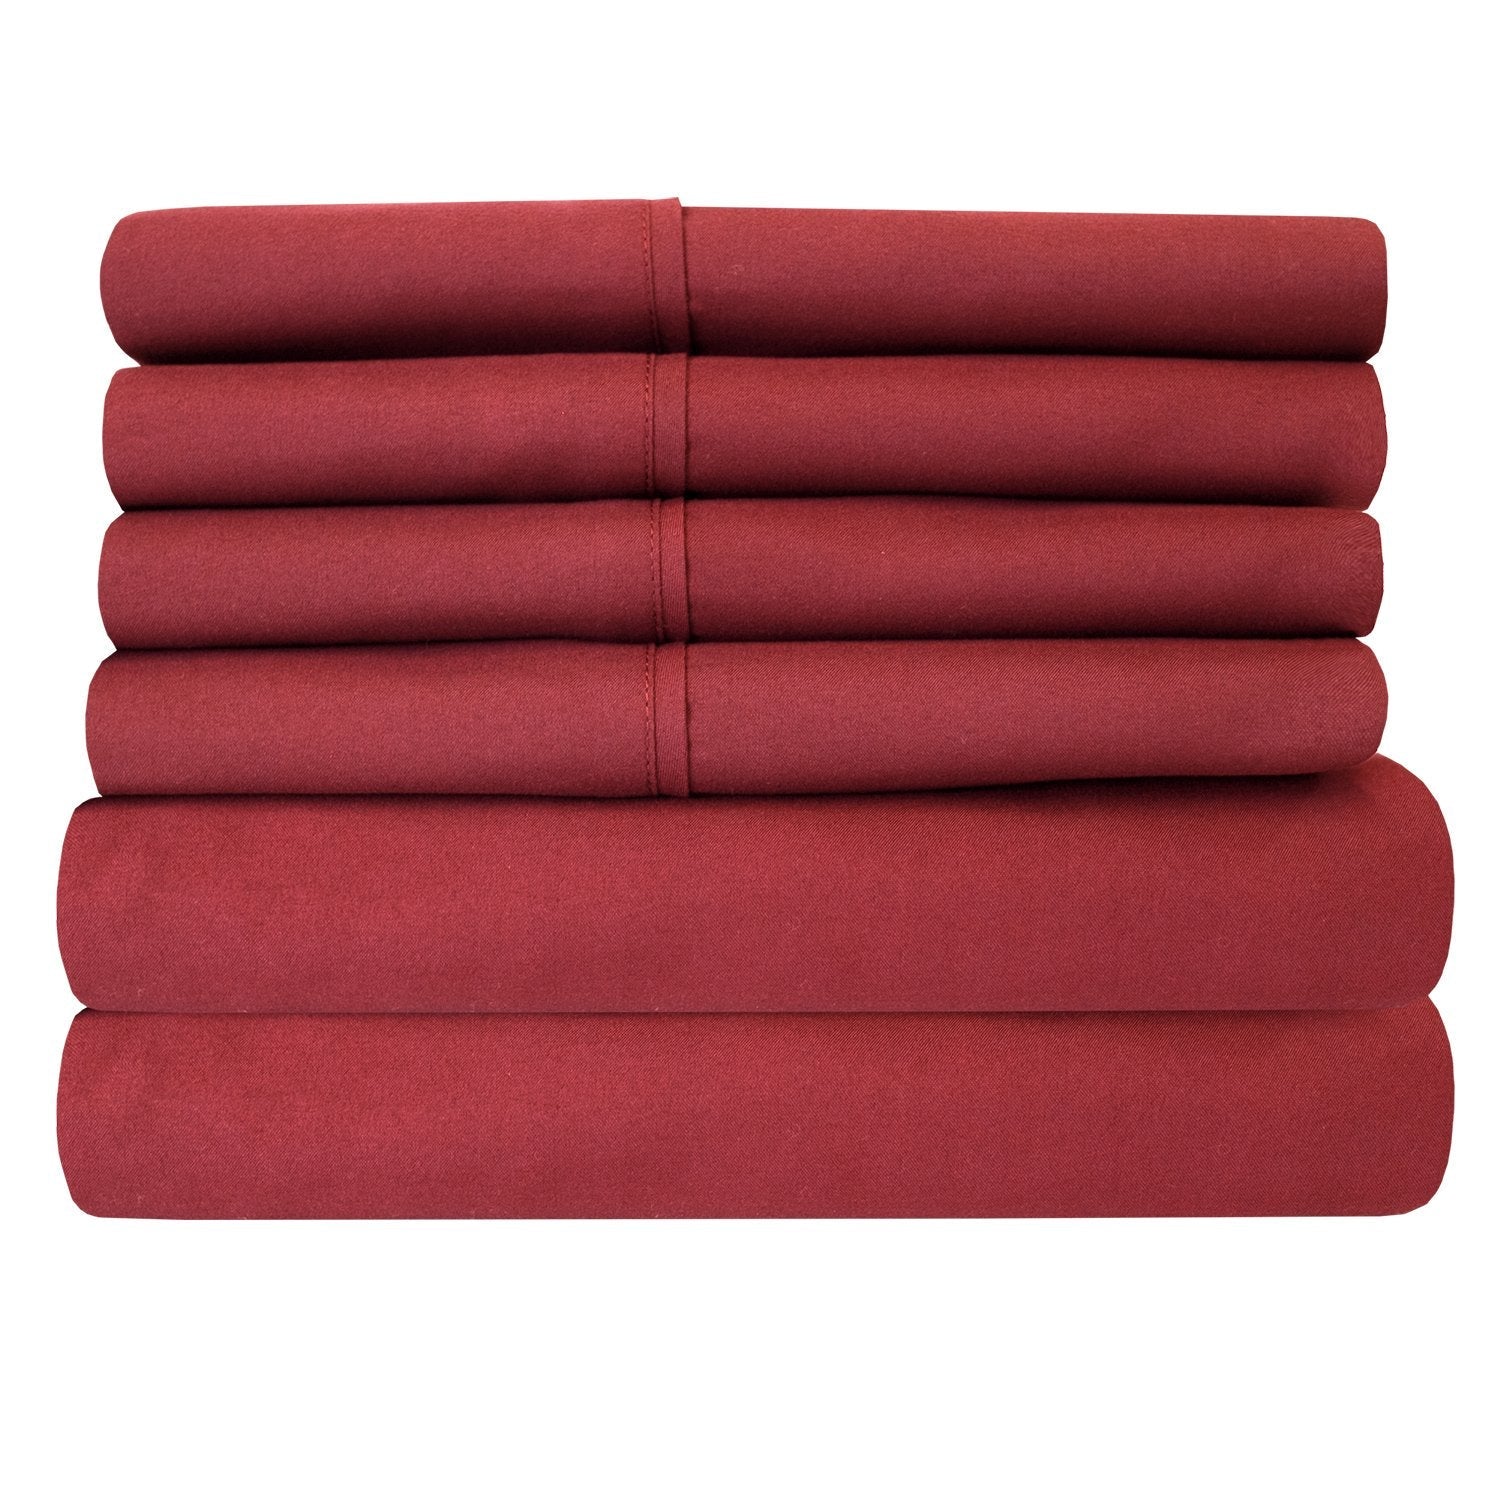 Deluxe 6-Piece Bed Sheet Set (Burgundy) - Folded 2